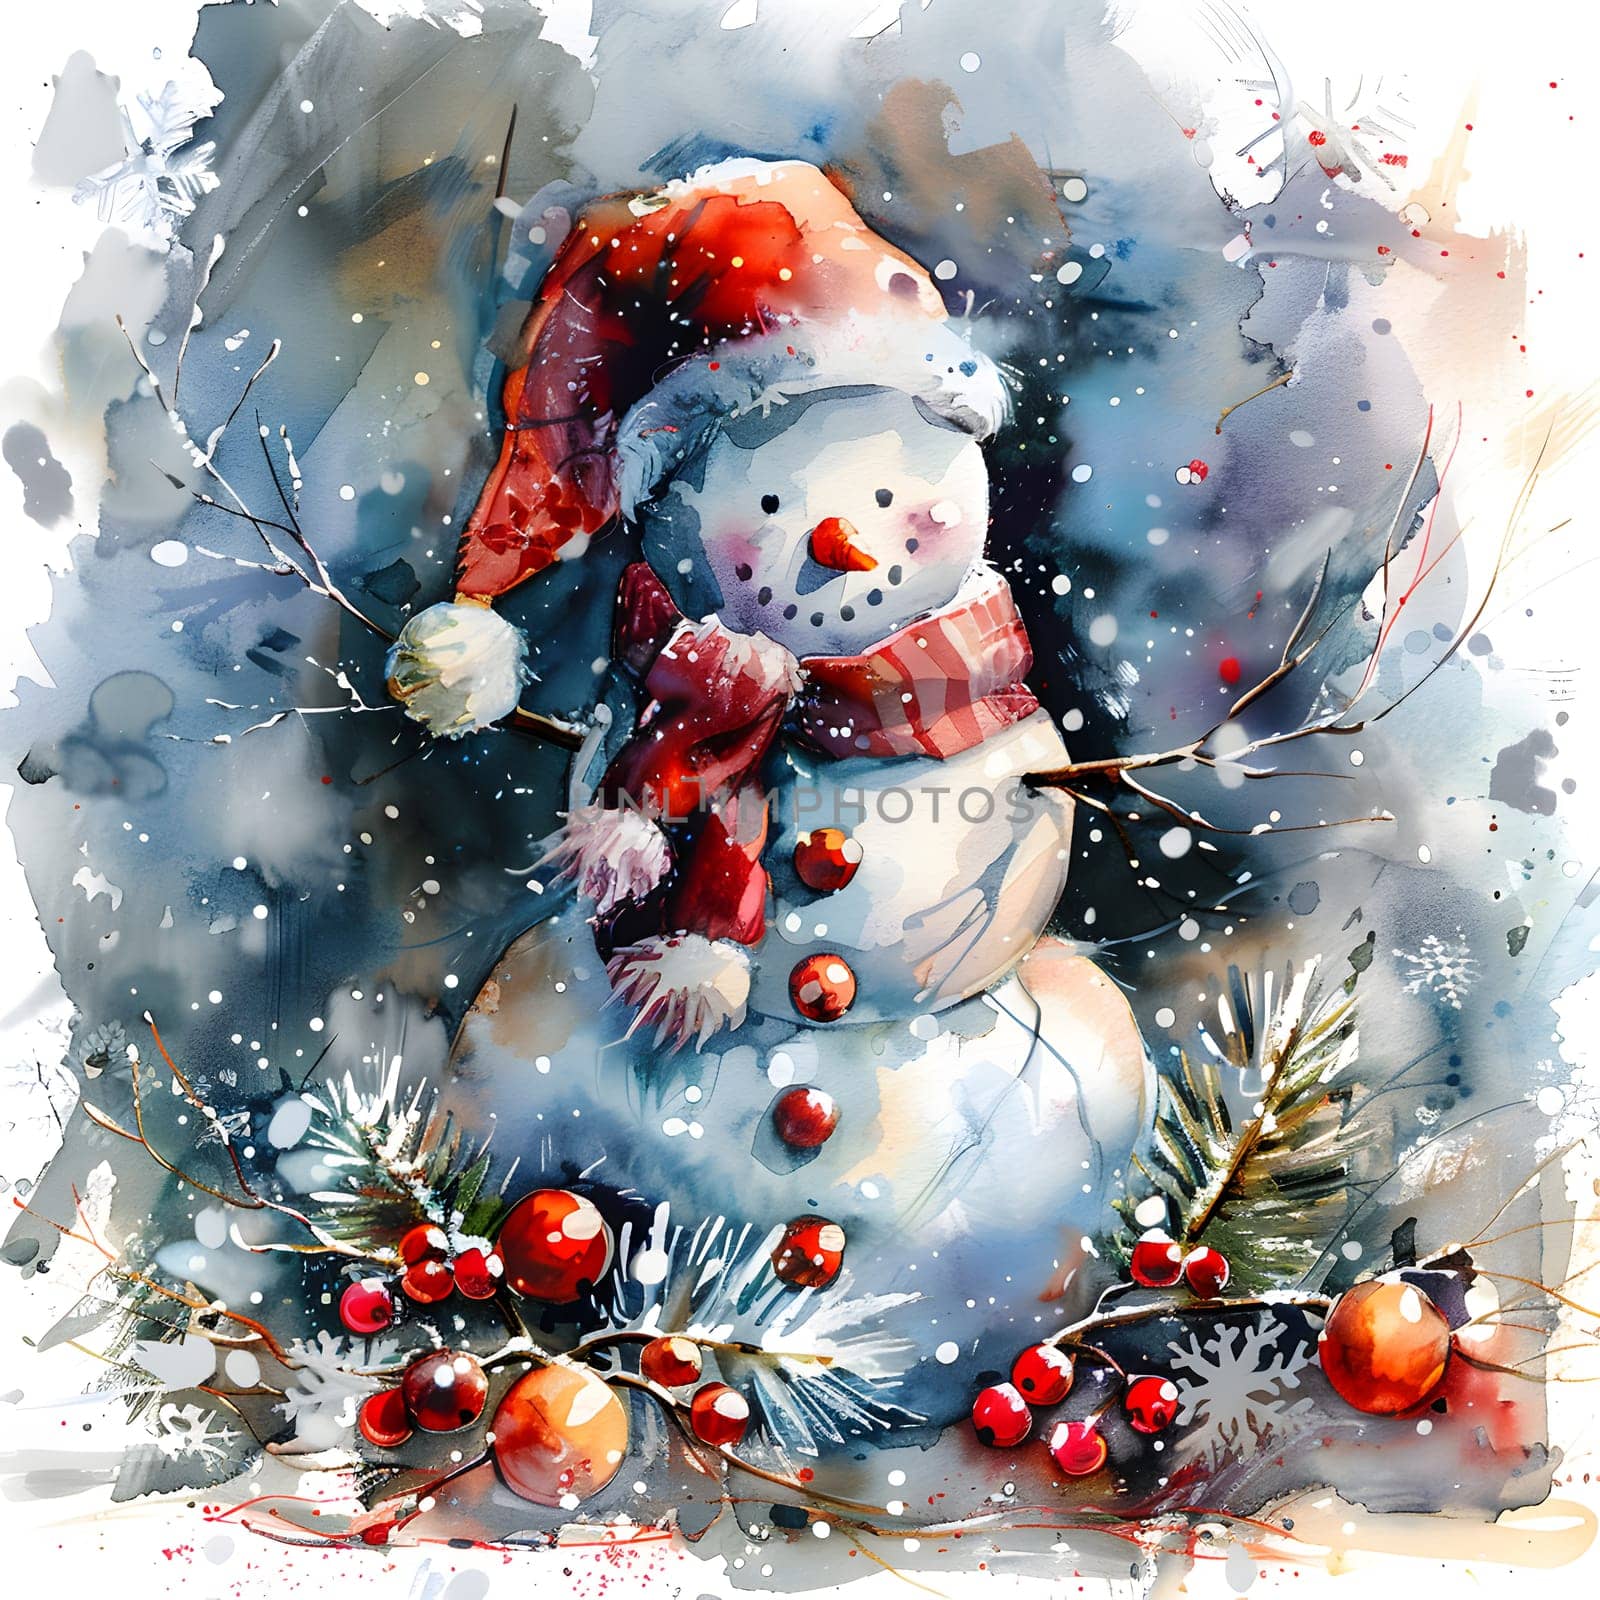 Snowman Christmas ornament with Santa hat and scarf watercolor painting by Nadtochiy